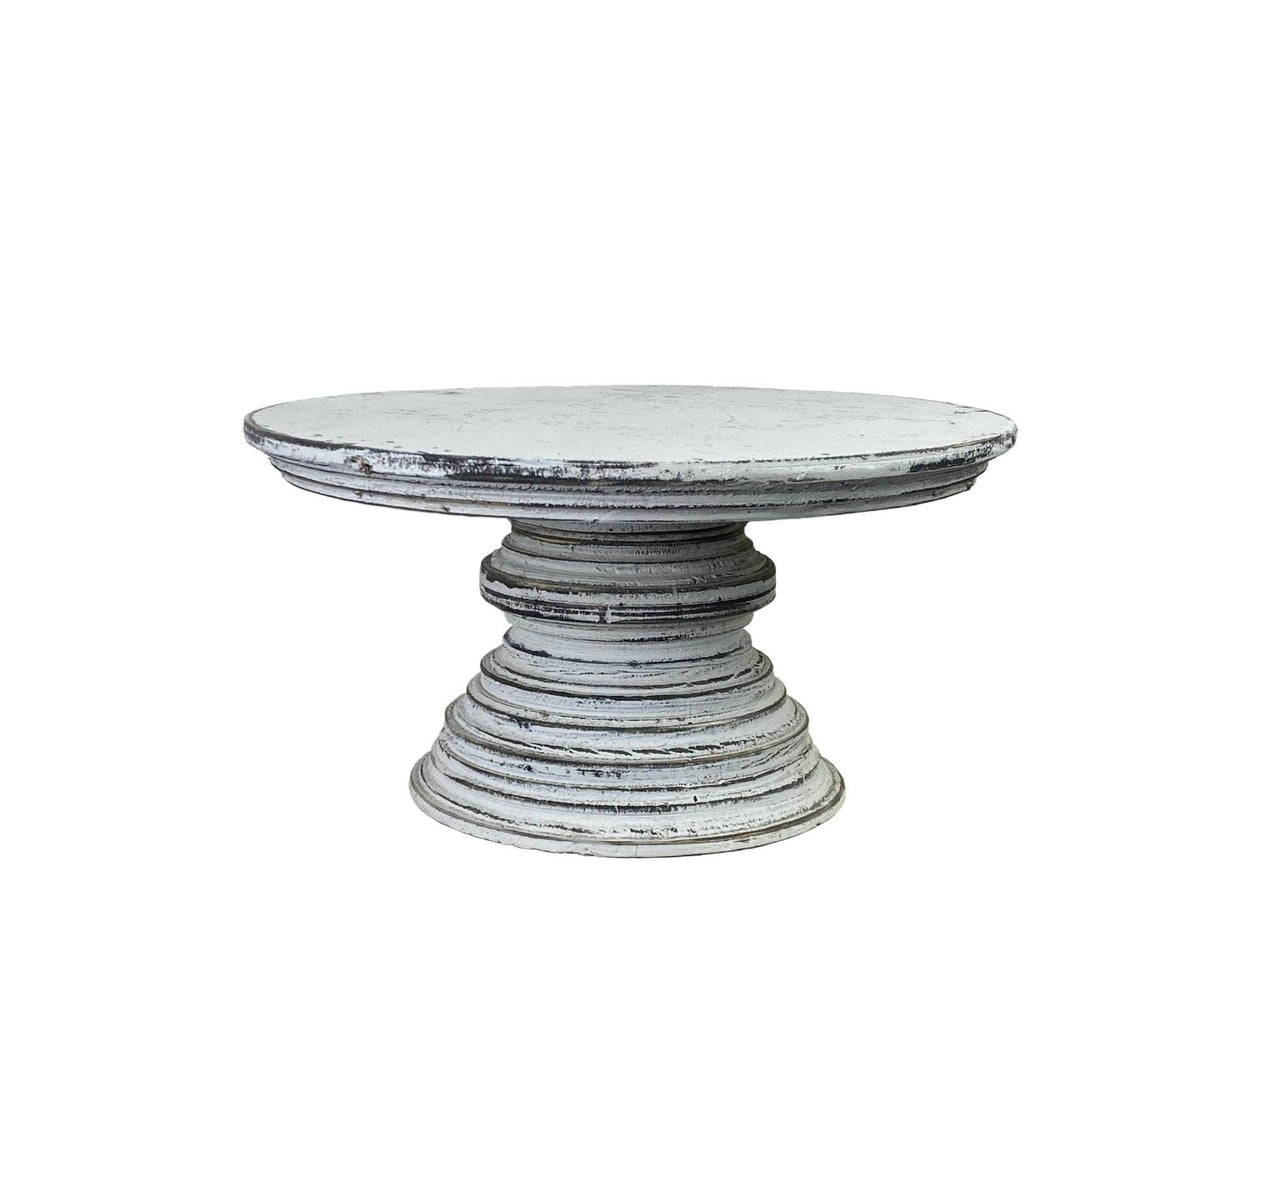 Born in a Barn - Cake Stand - Rubbish Restyled